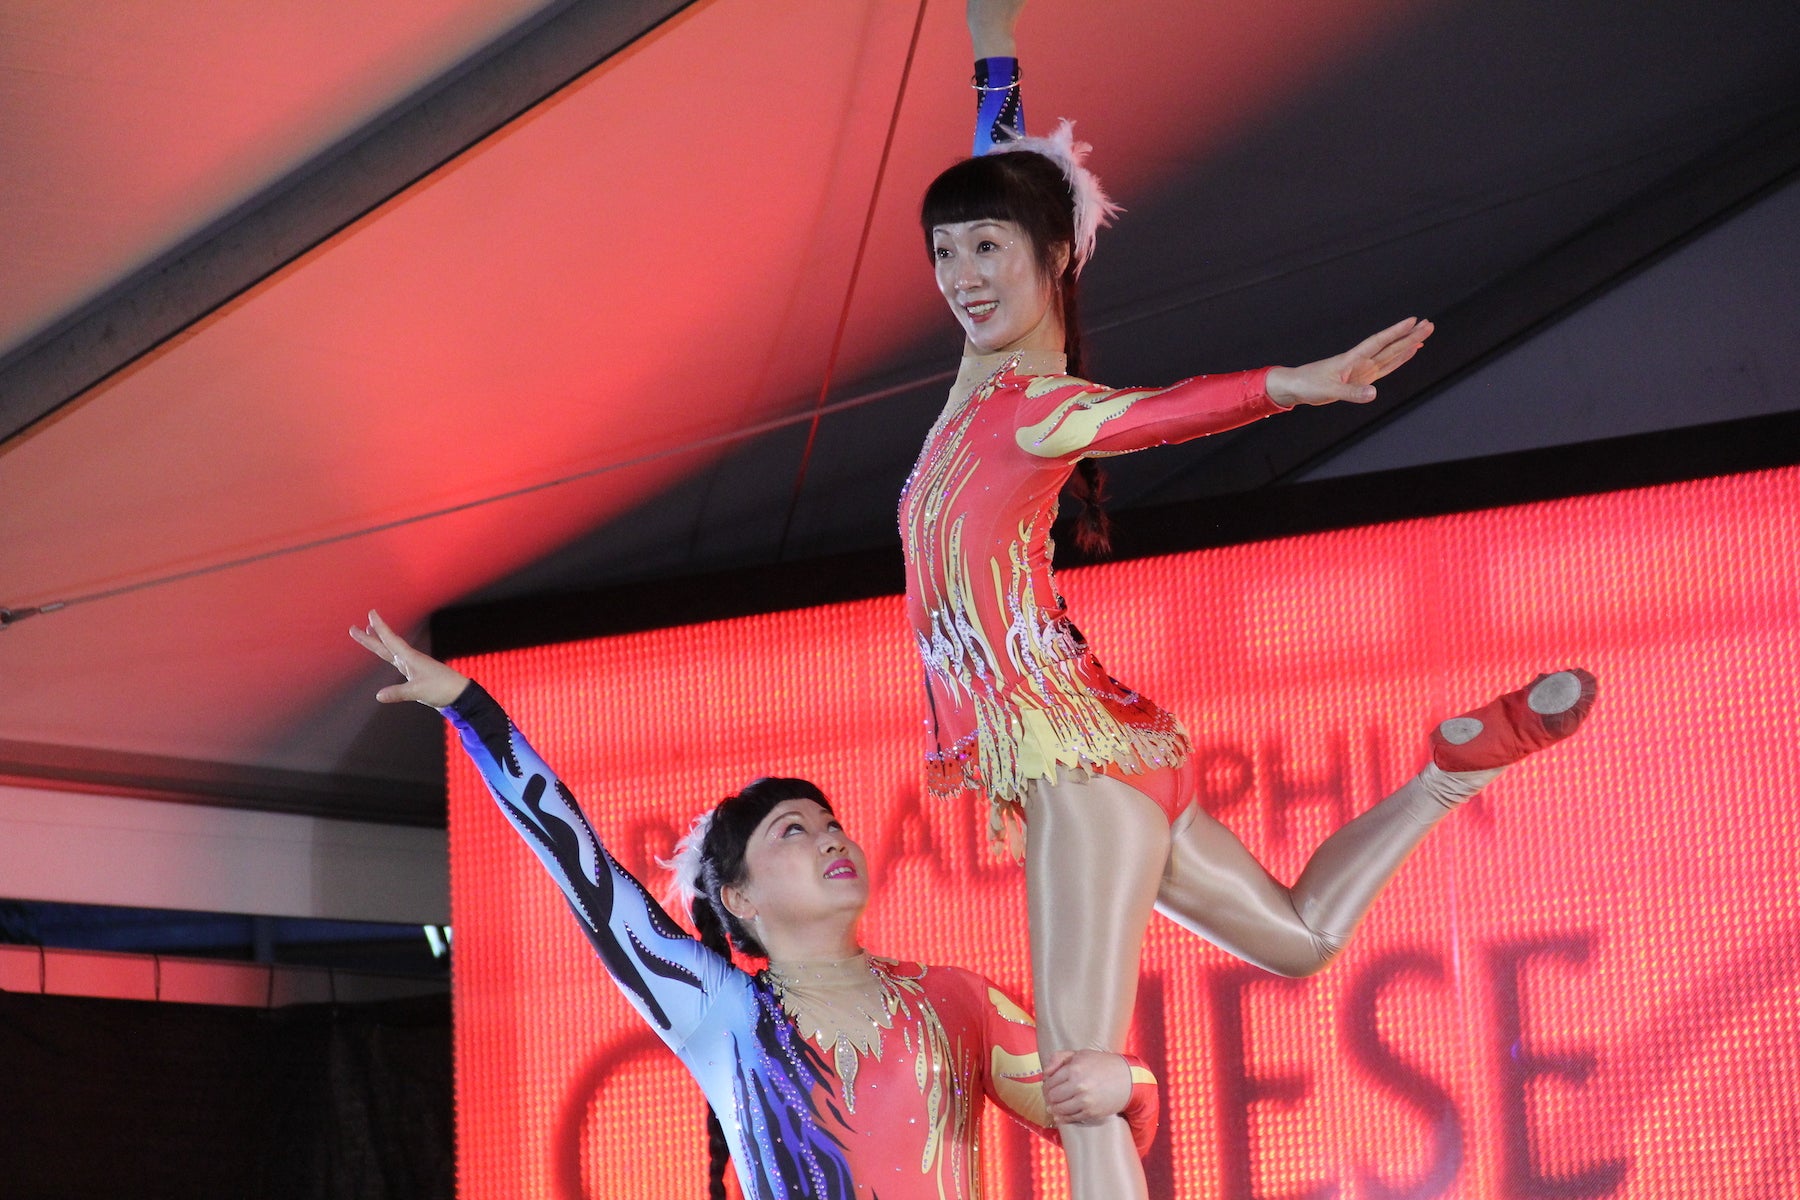 Acrobats perform on stage